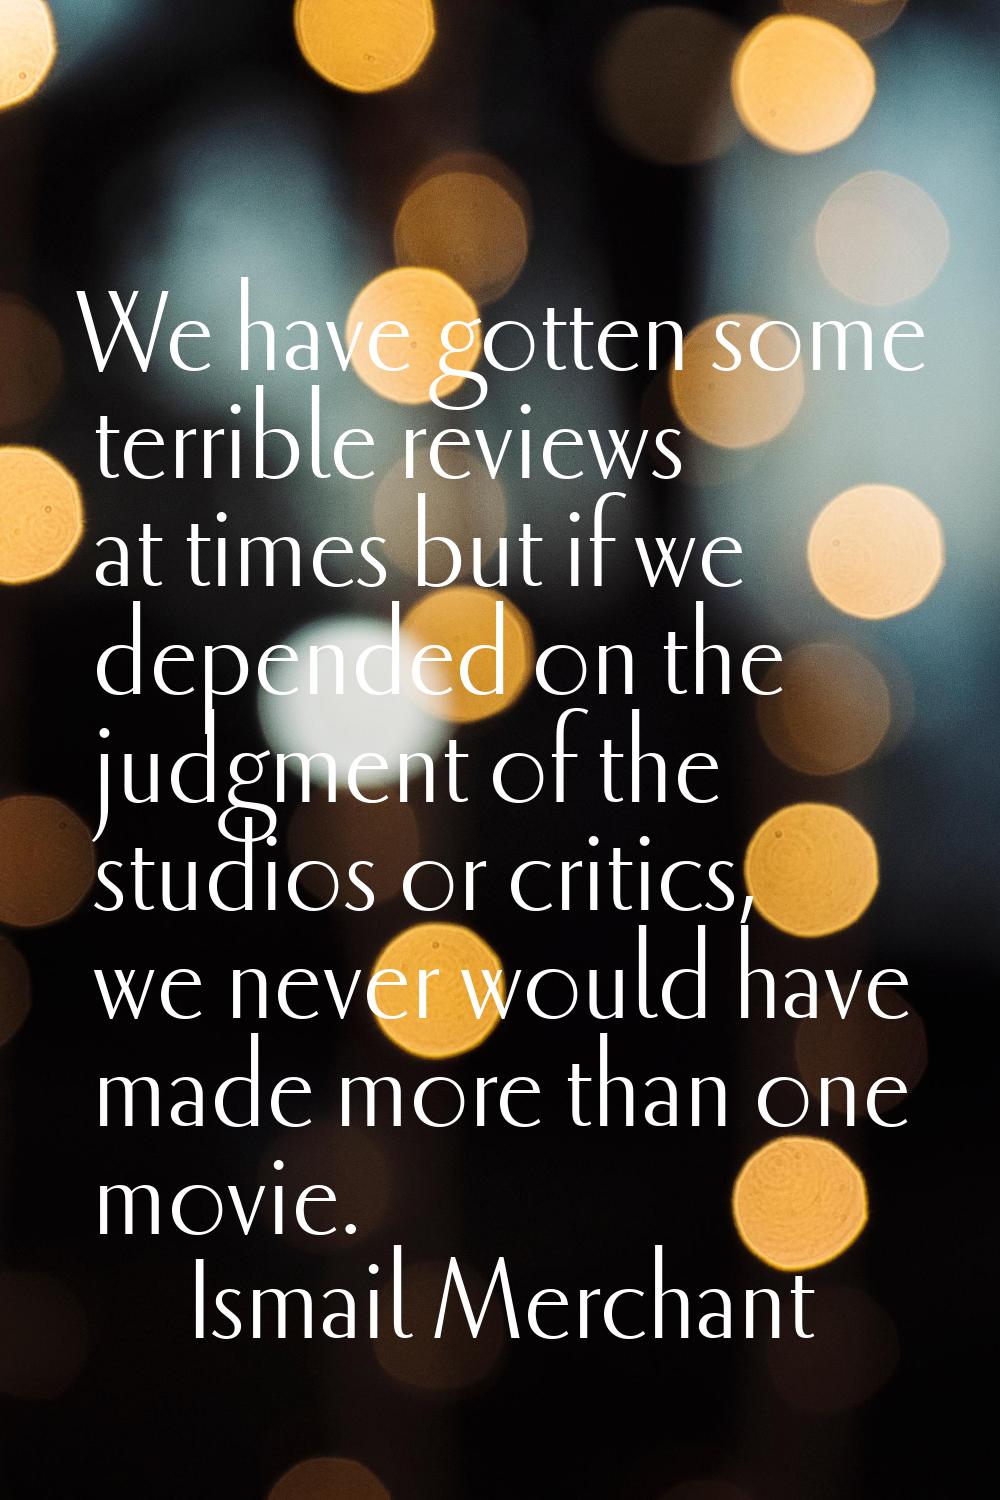 We have gotten some terrible reviews at times but if we depended on the judgment of the studios or 